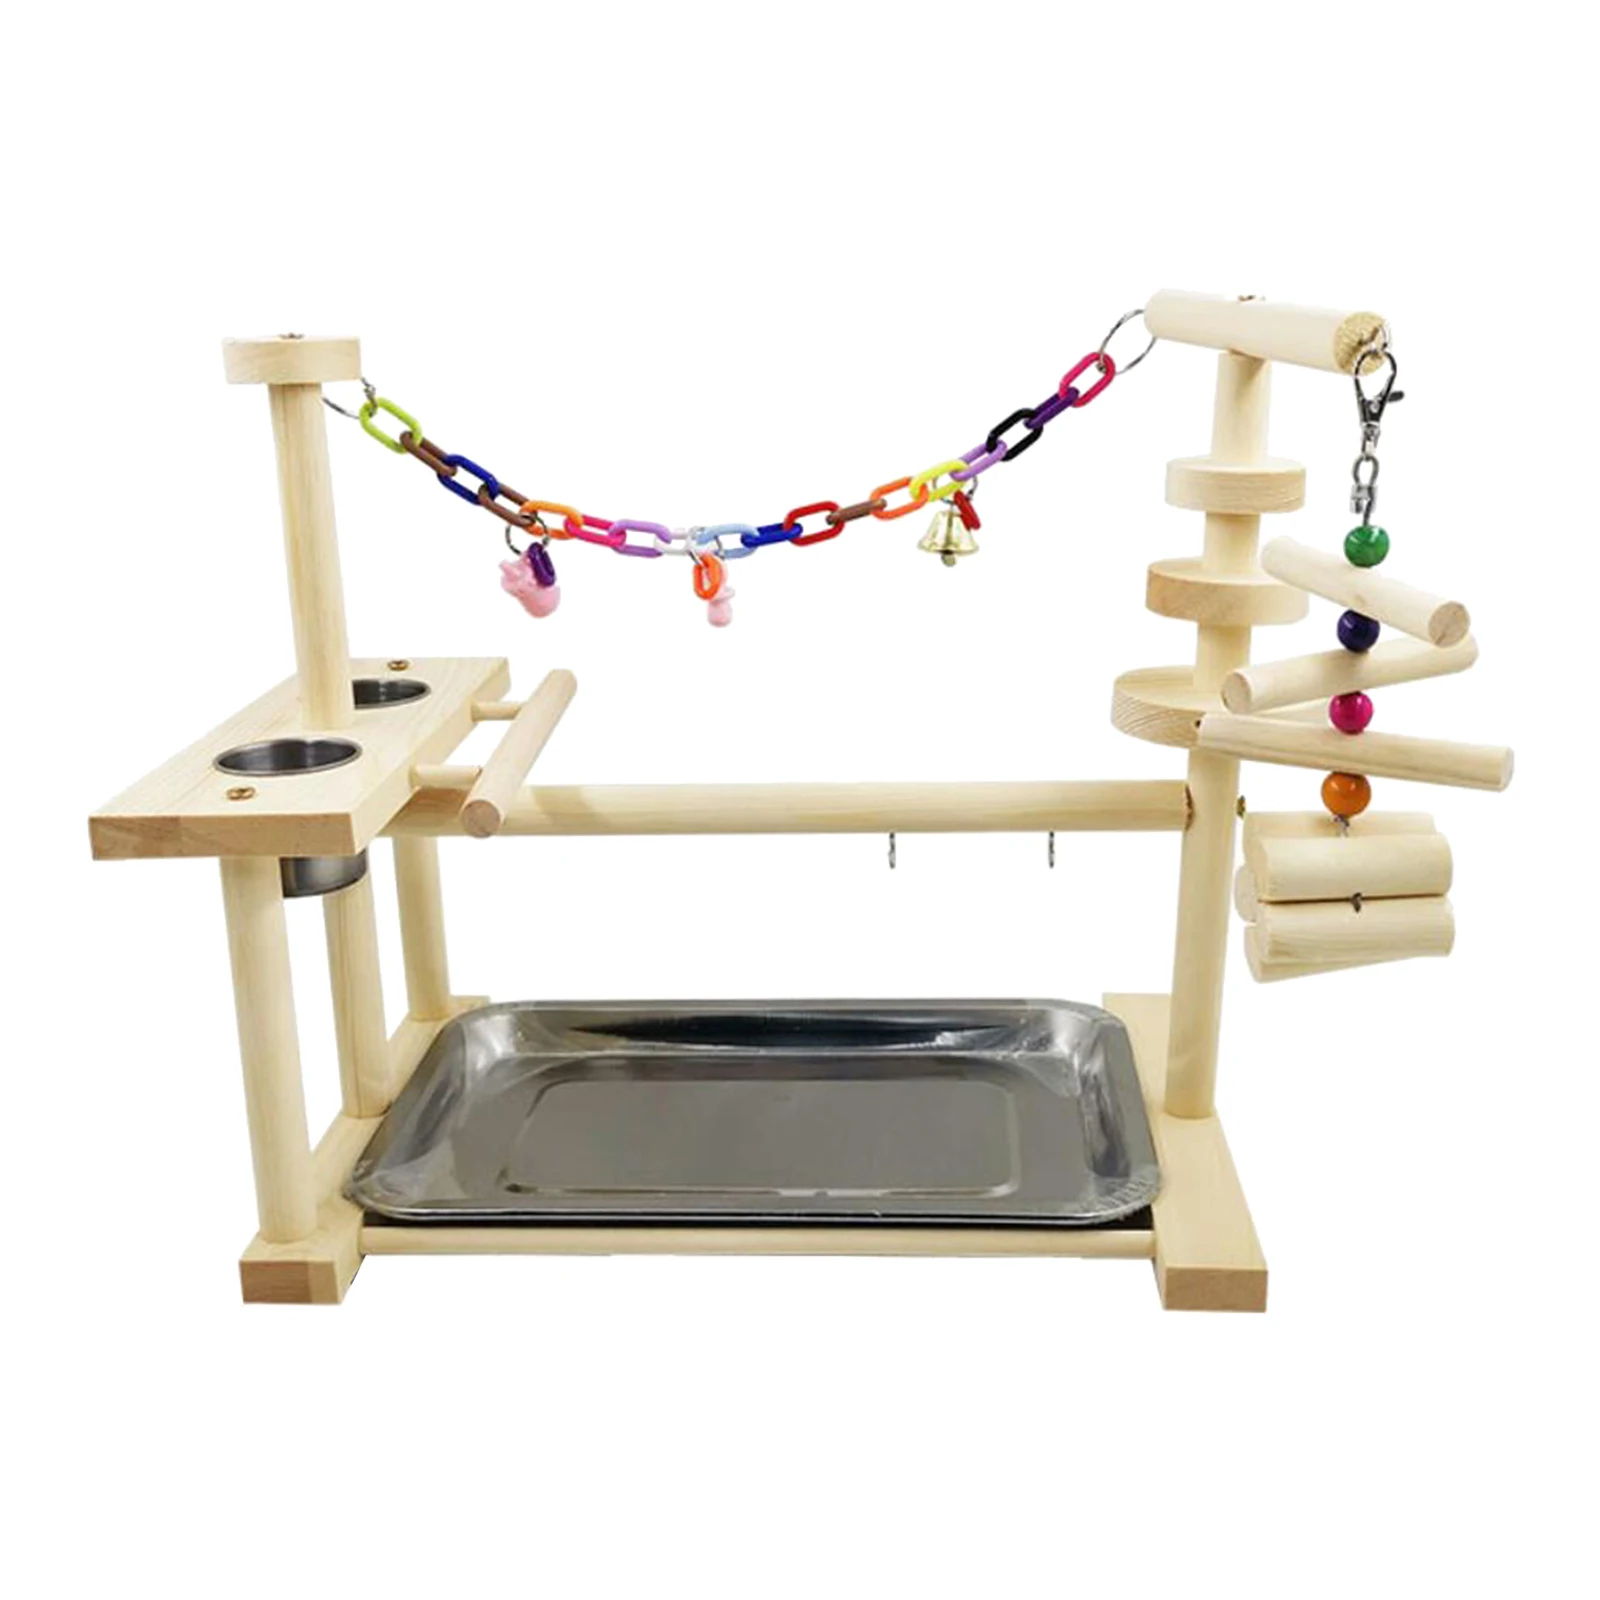 Parrot Playstand Bird Play Stand Cockatiel Playground Wood Perch Gym Playpen Ladder with Feeder Cups Toys 